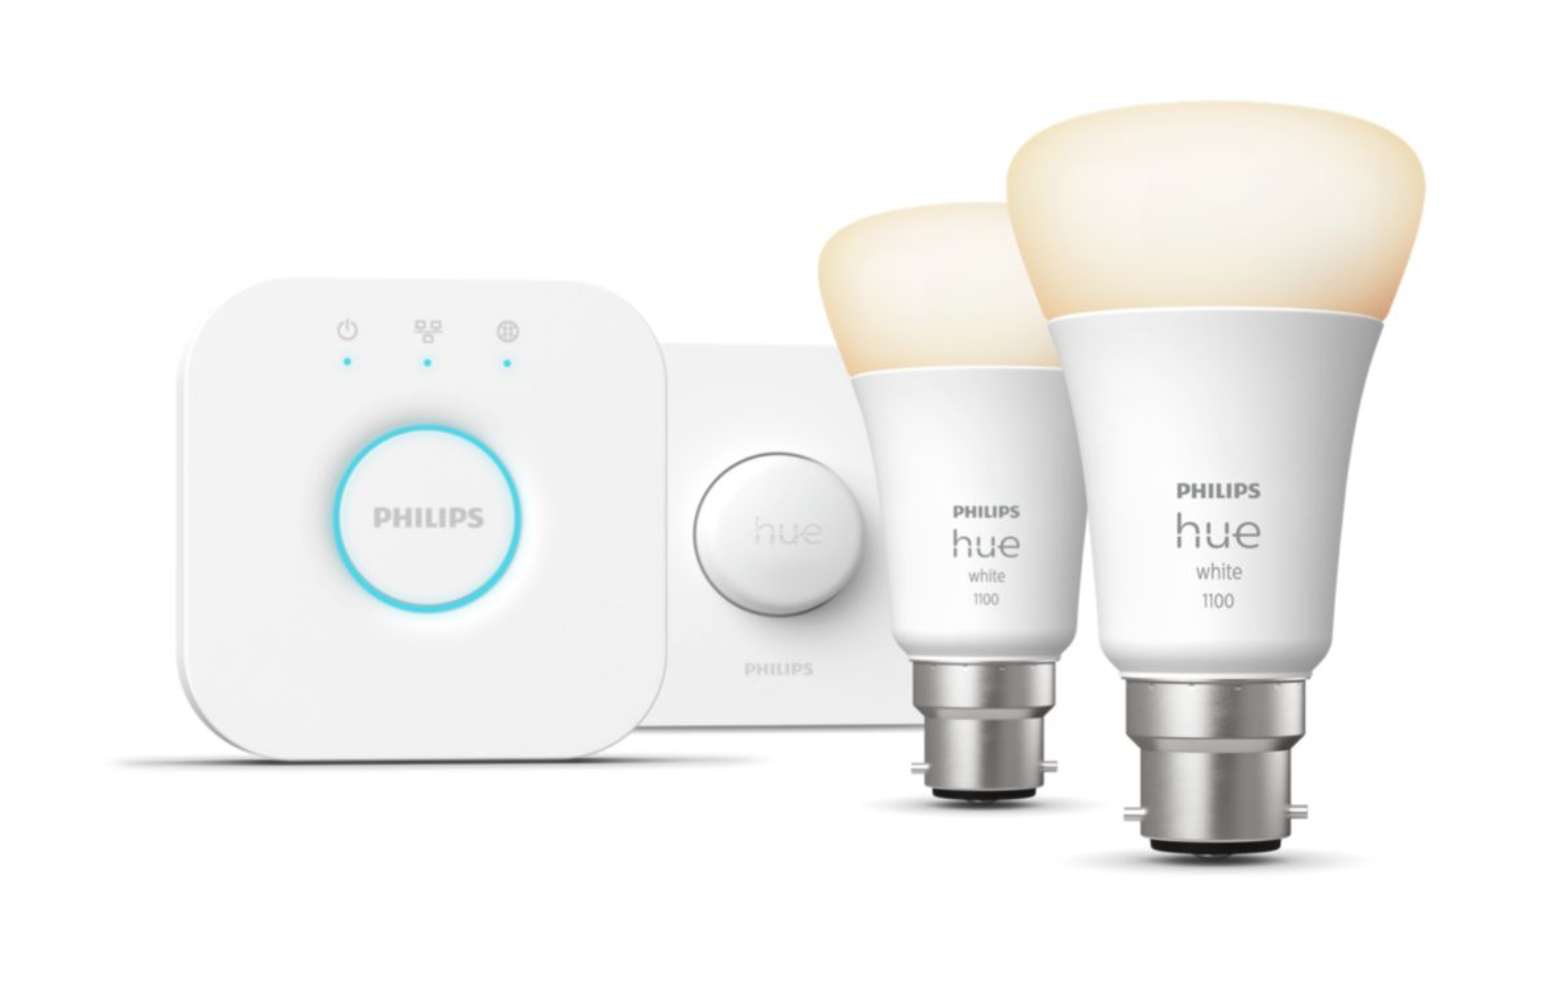 Philips Hue Lights are perfect for creating balanced lighting conditions